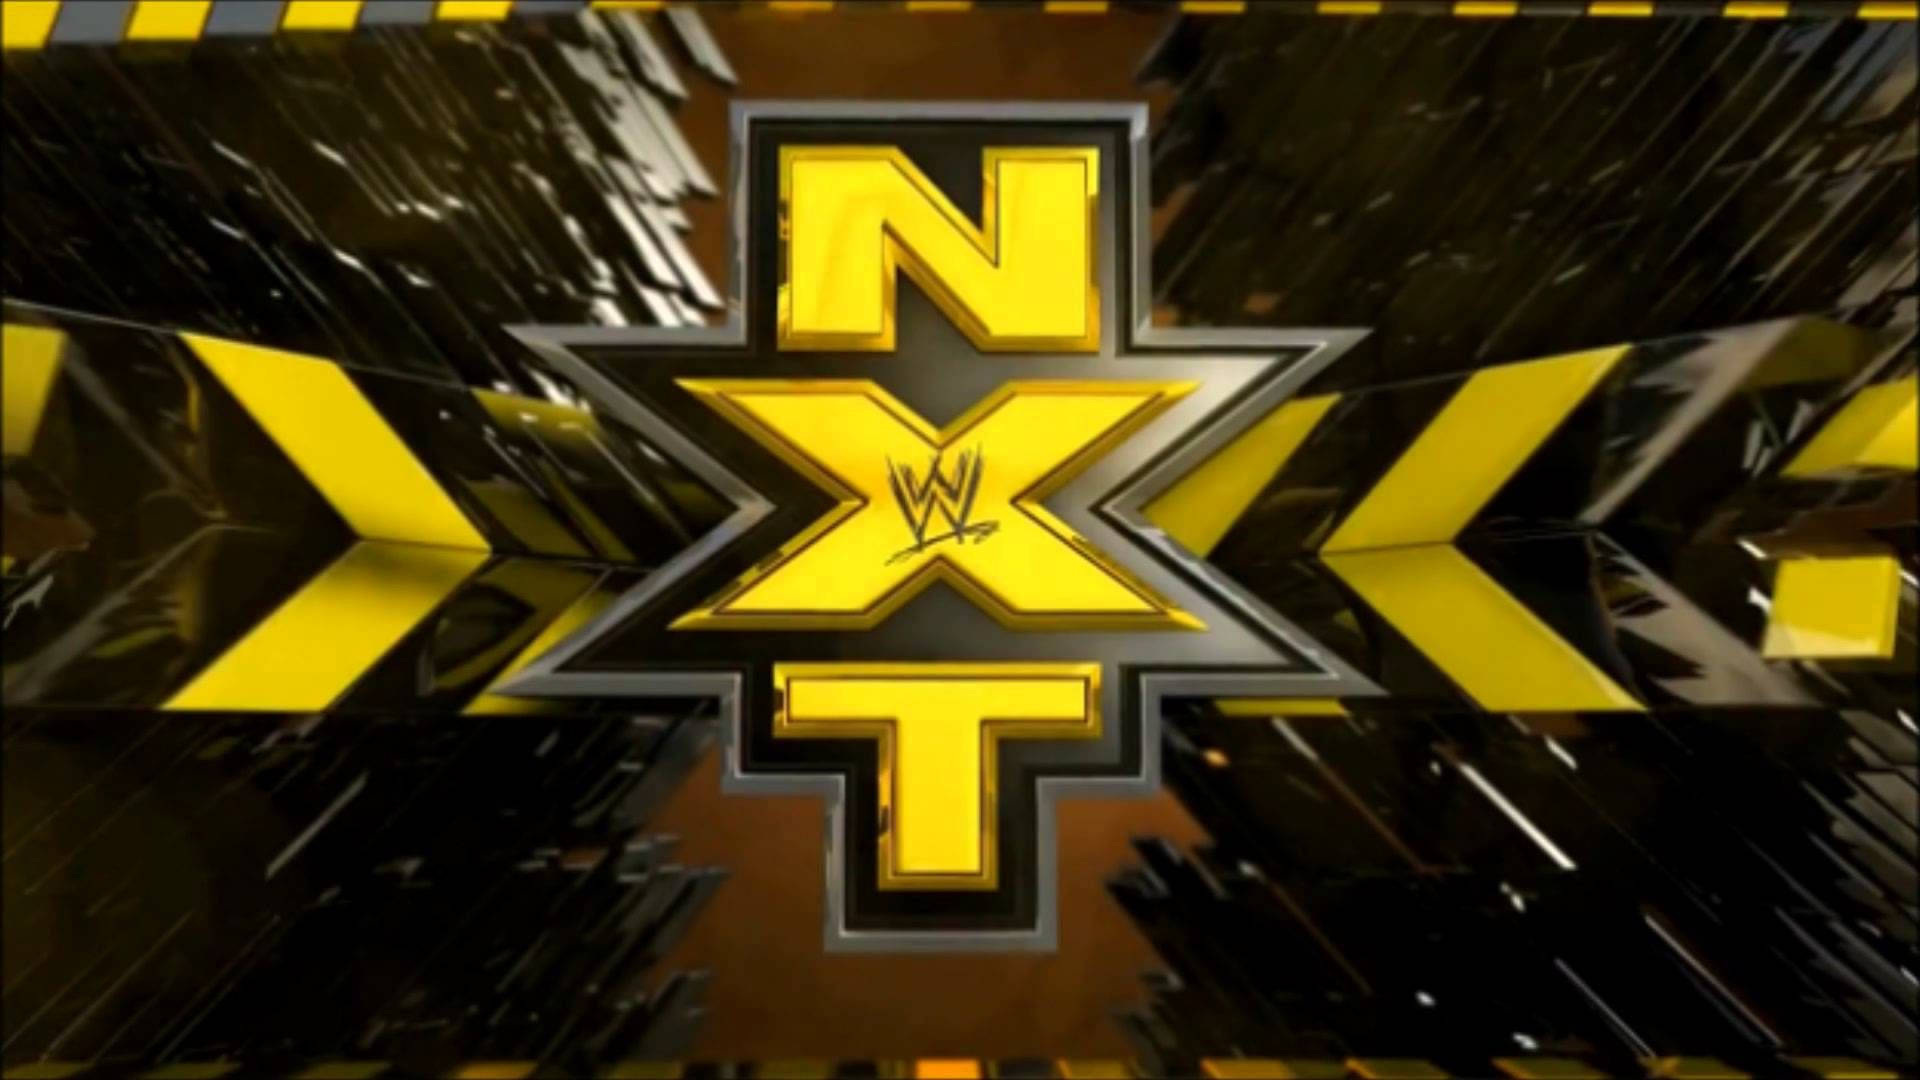 Intense Wwe Nxt Poster In Yellow Theme Background